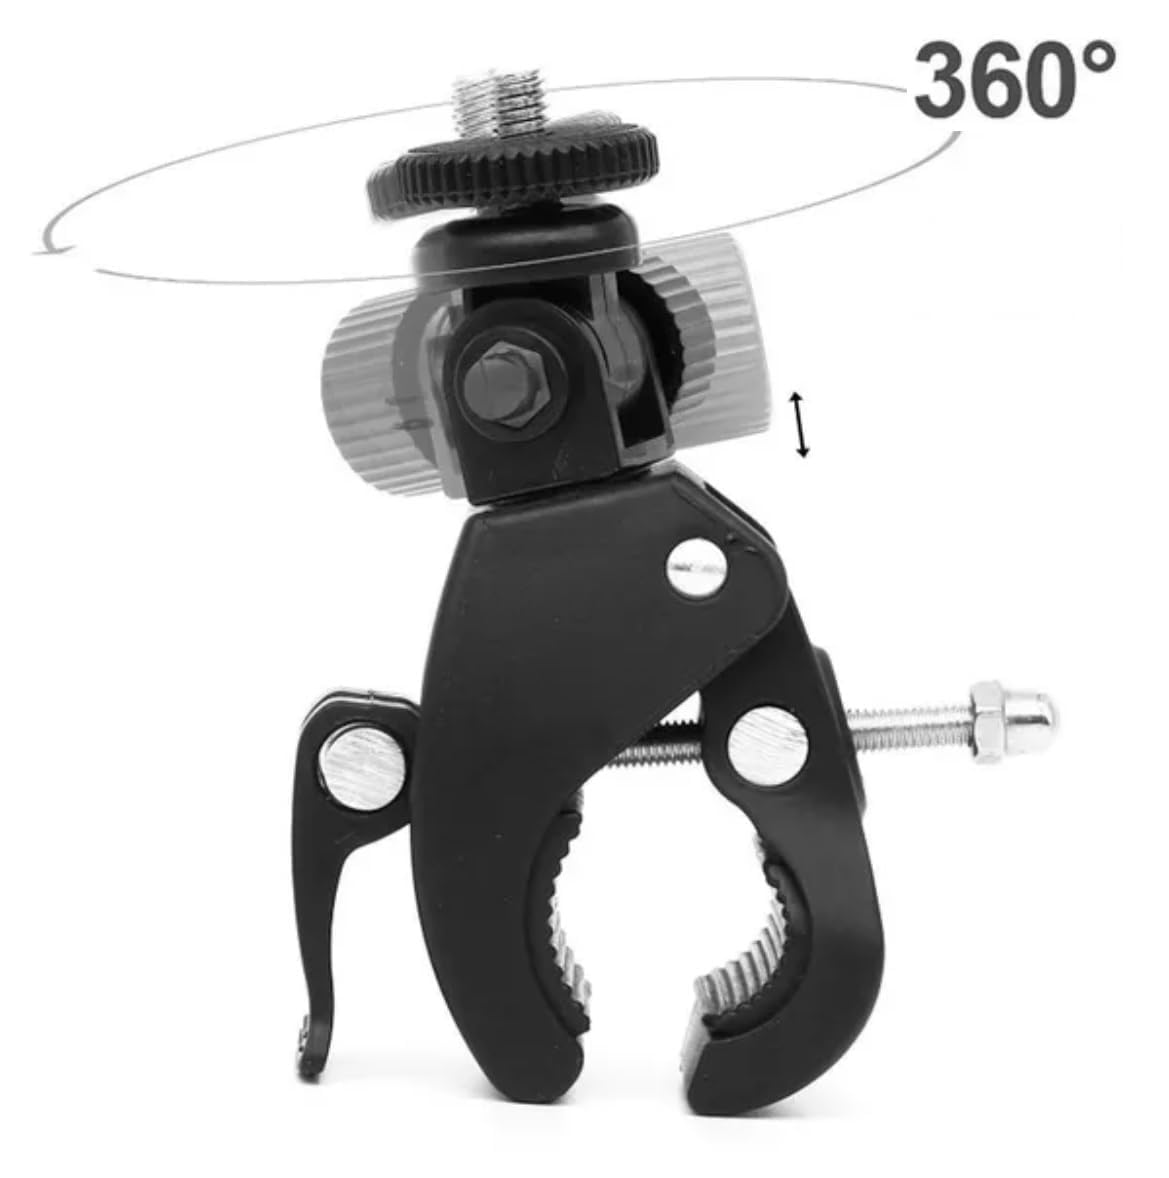 ADZOY Premium Super Clamp Camera Mount Clamp with 360° Rotation, Bike/Bicycle/Motorcycle Handlebar Mount for Insta360/GoPro/AKASO/DJI Osmo Action Cameras, DSLR/Cameras/Lights Pole Tube Mount